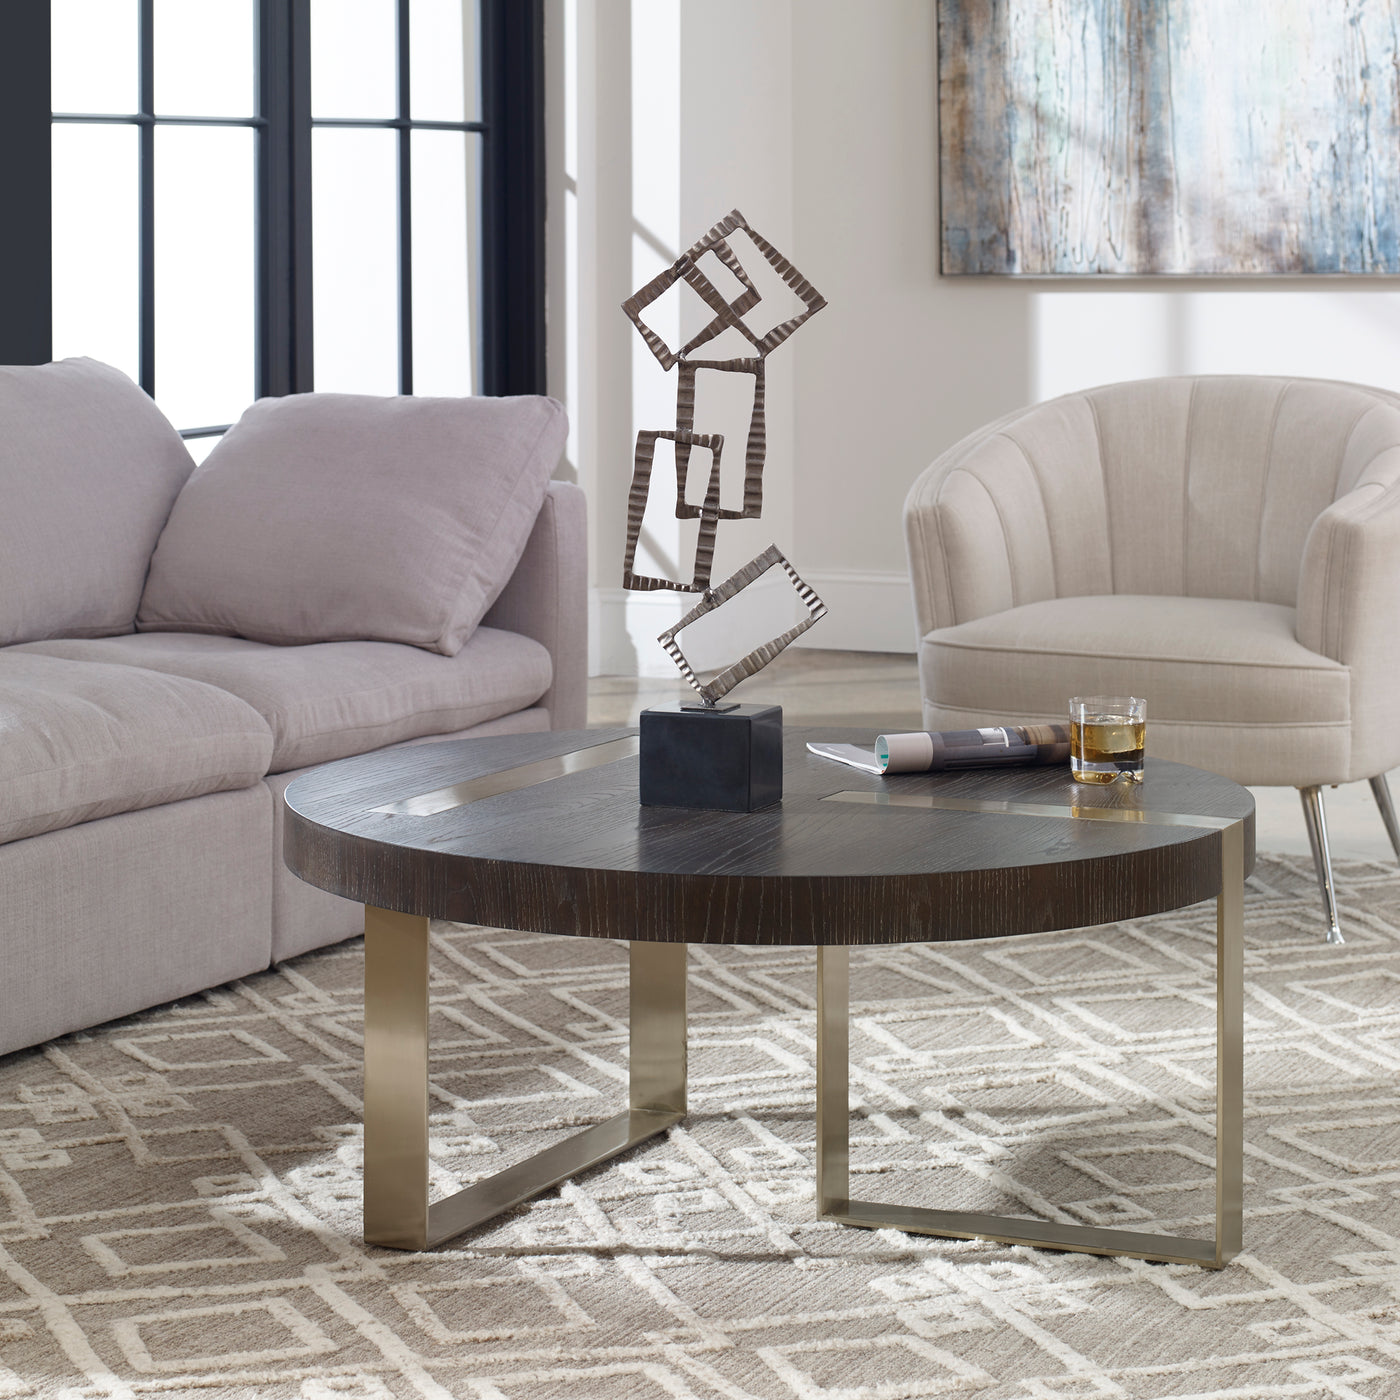 Sleek And Modern, This Coffee Table Showcases Linear Steel Accents Plated In A Brushed Pewter Accented By A Dry Ebony Fini...